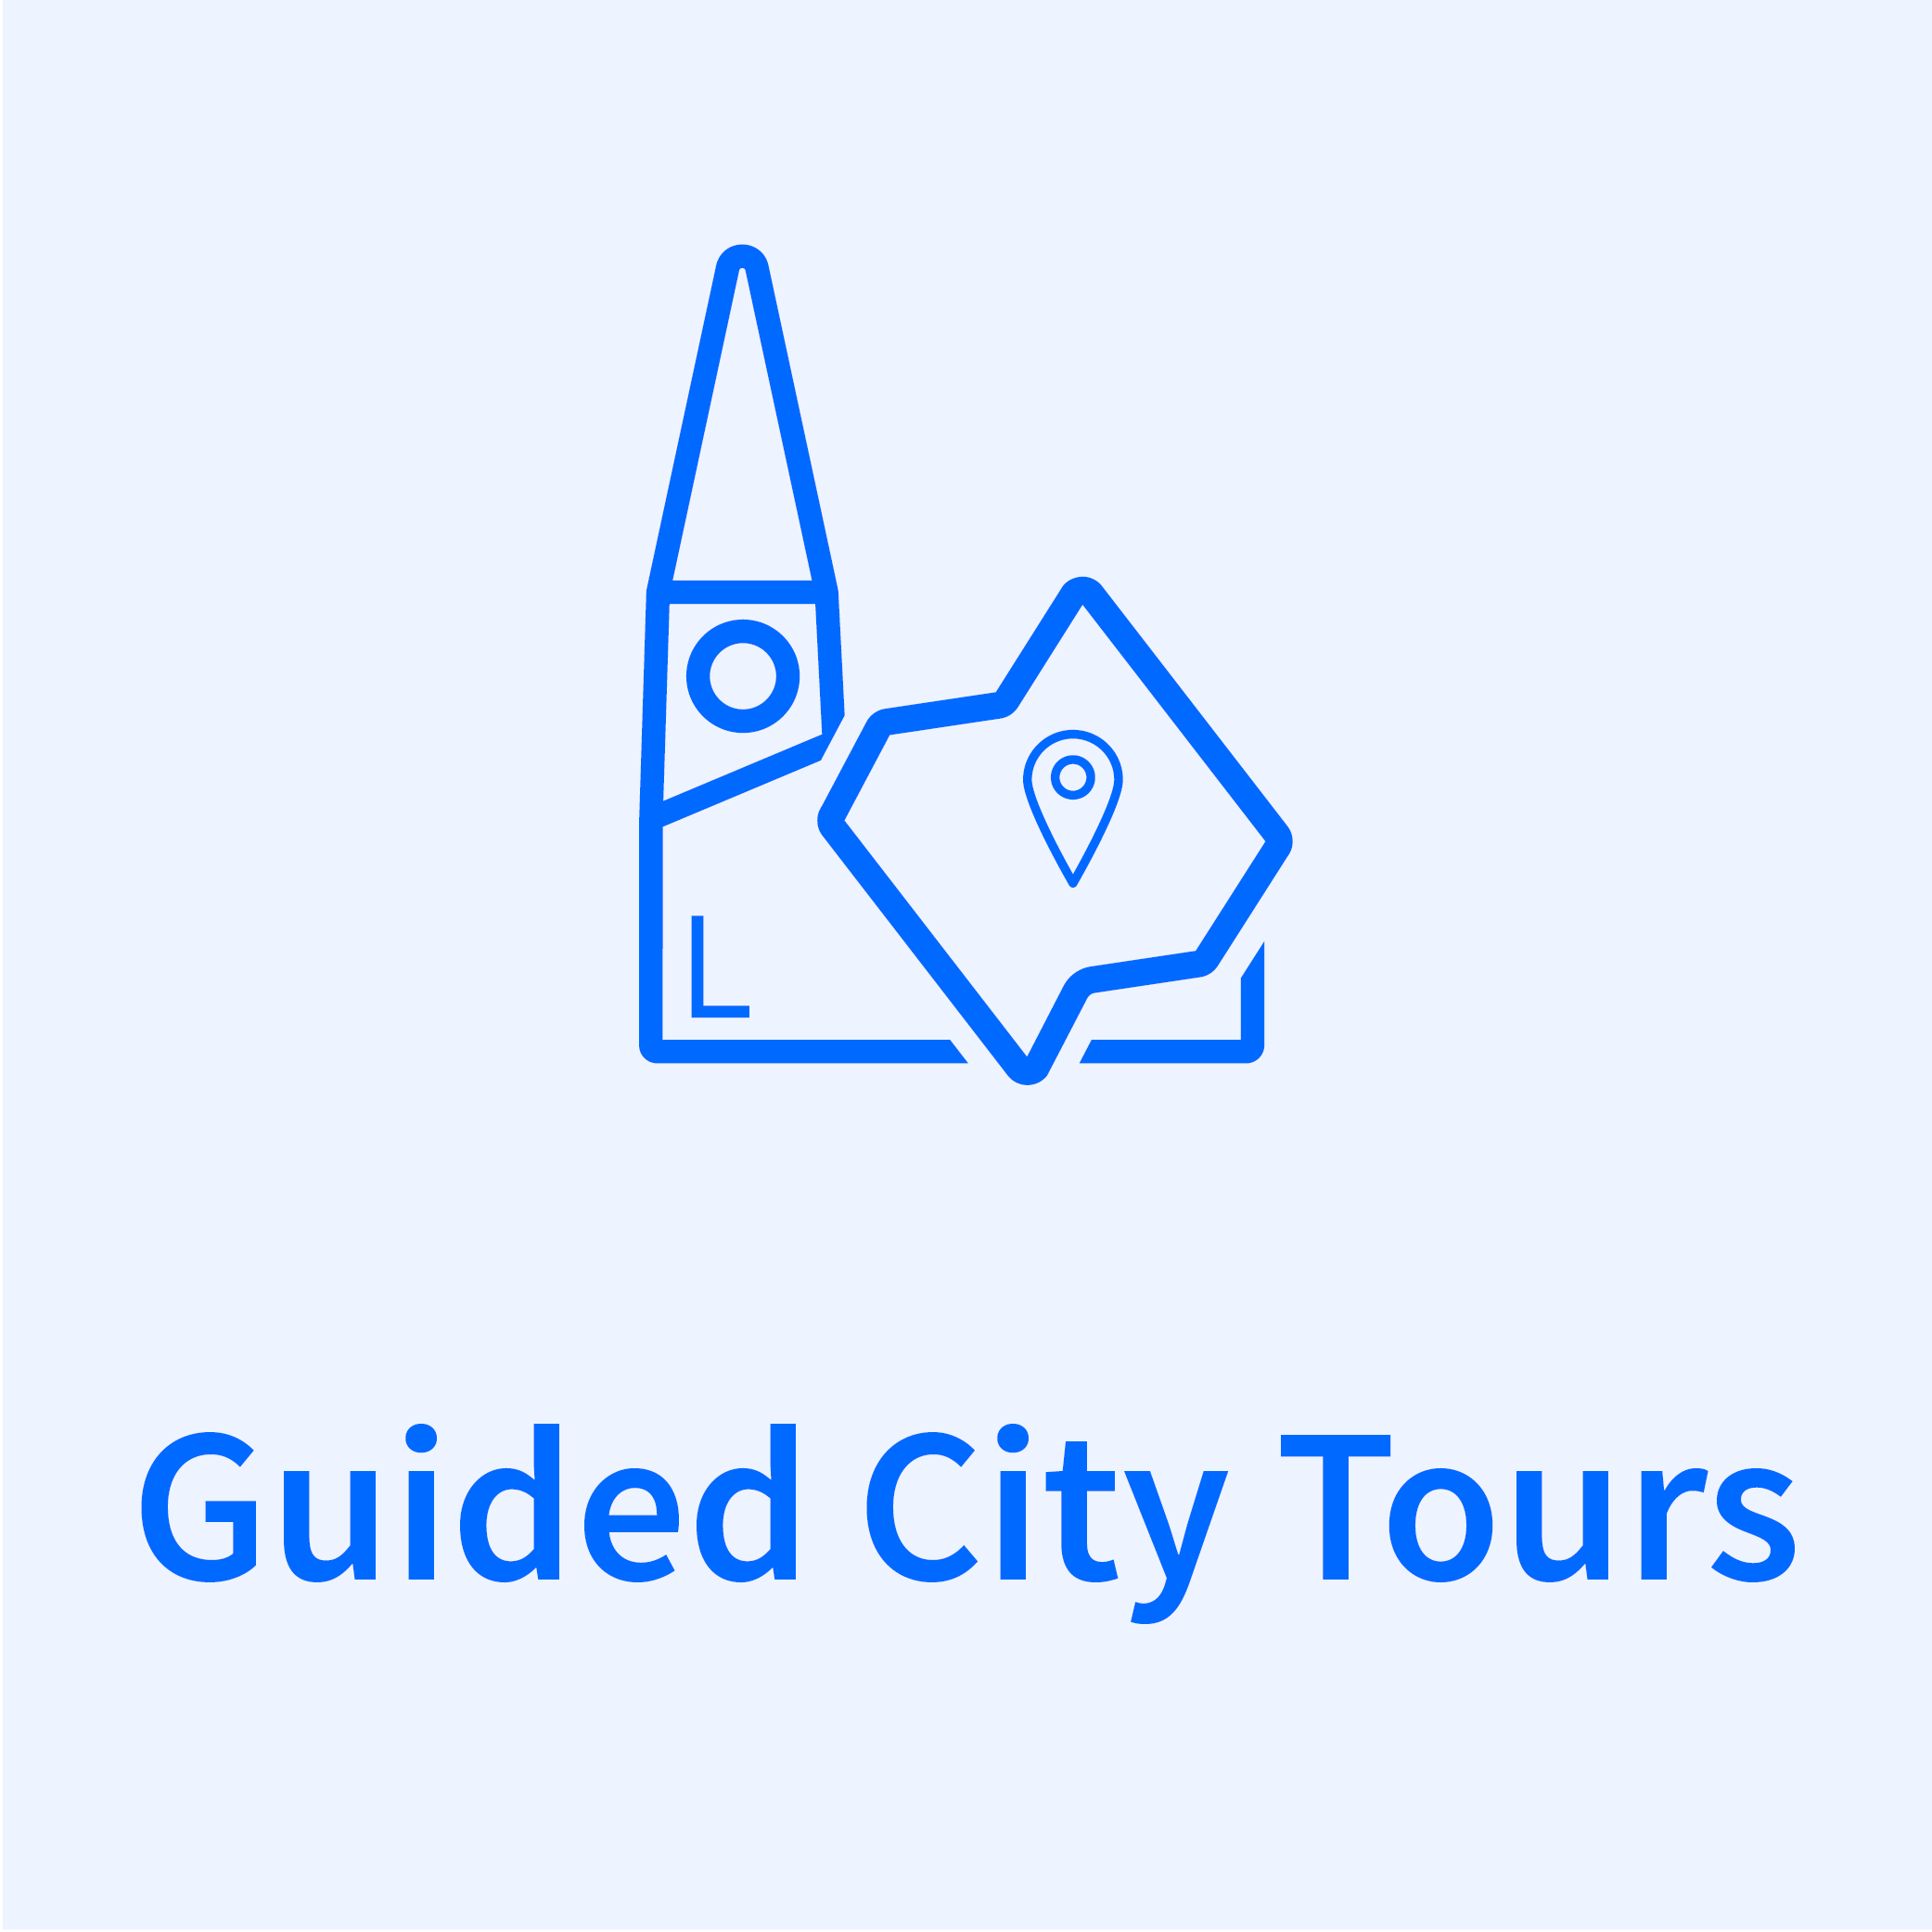 Guided City Tours